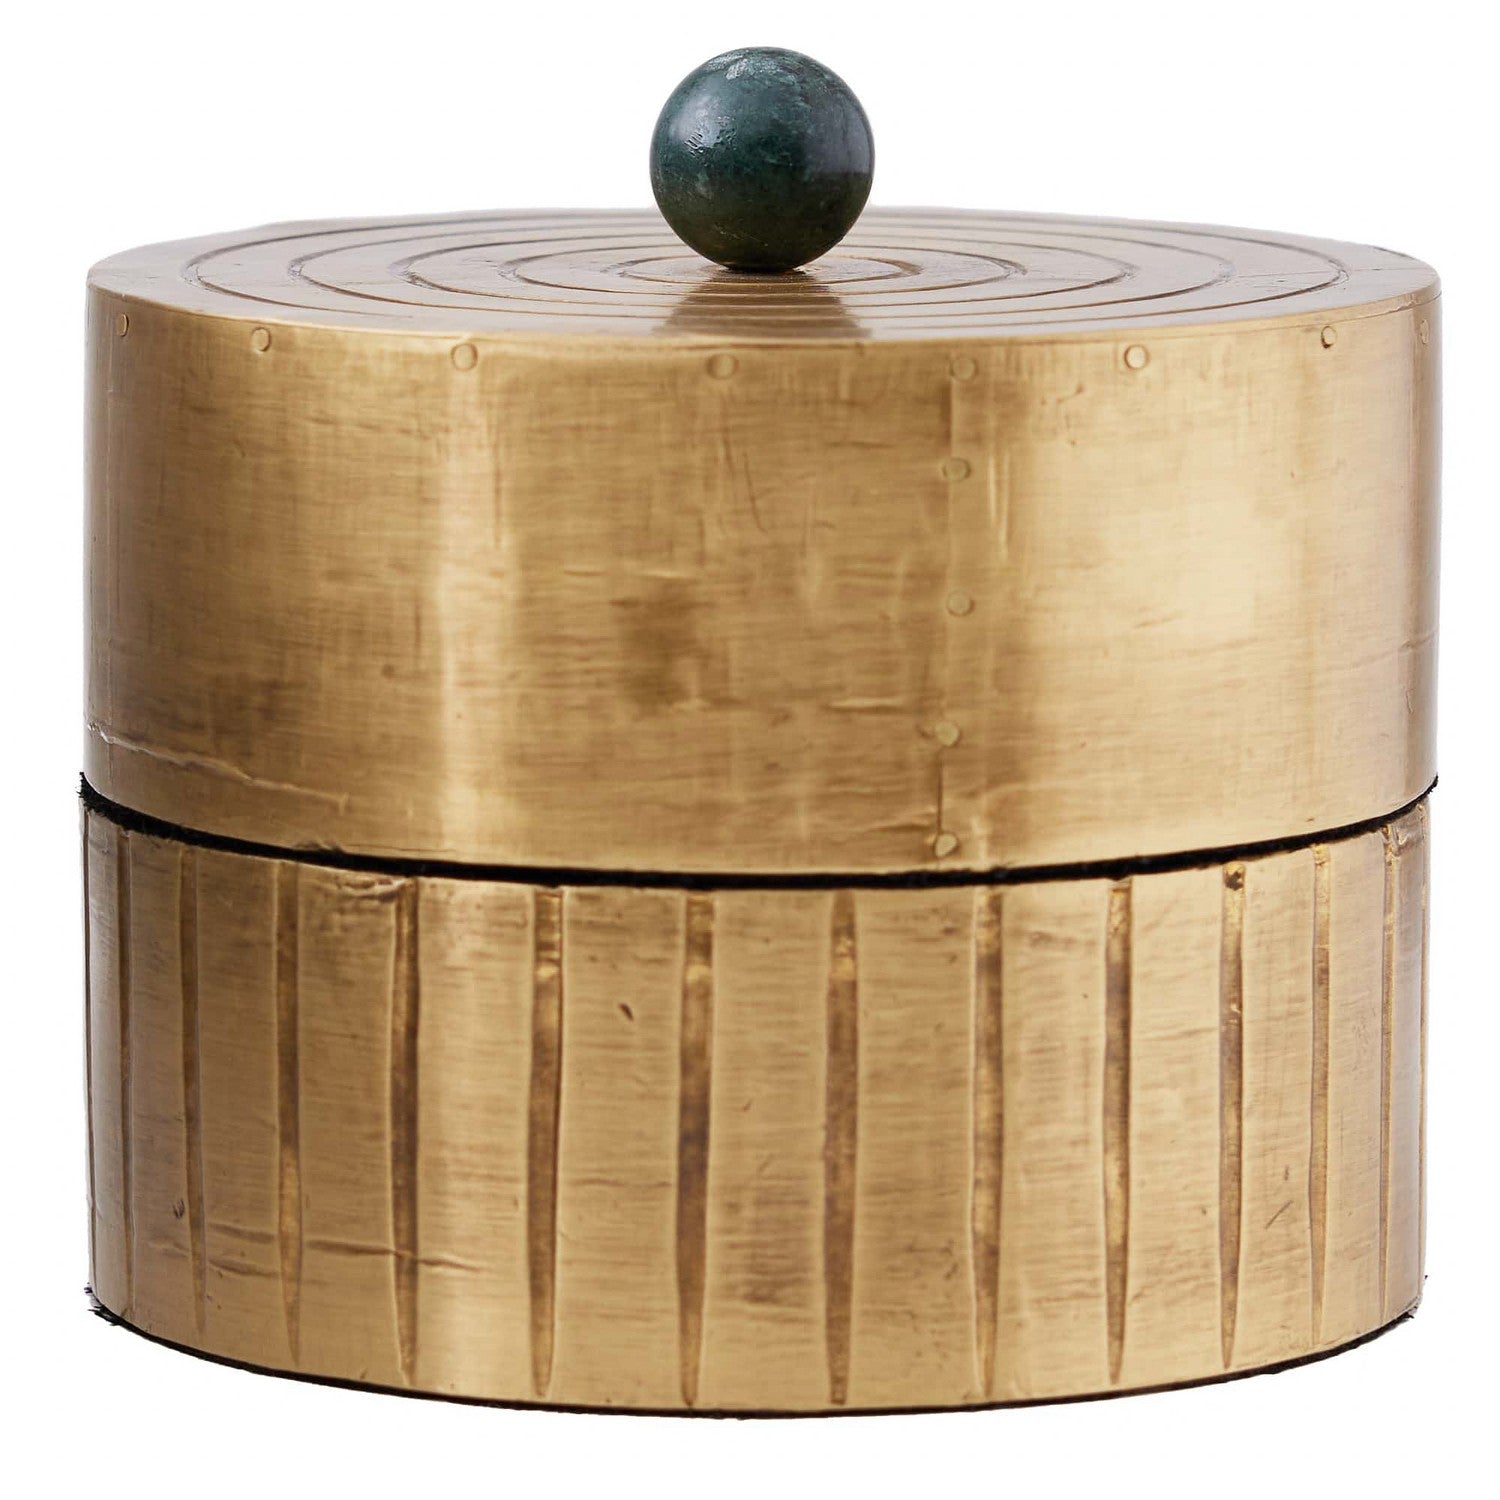 Box from the Truitt collection in Antique Brass finish